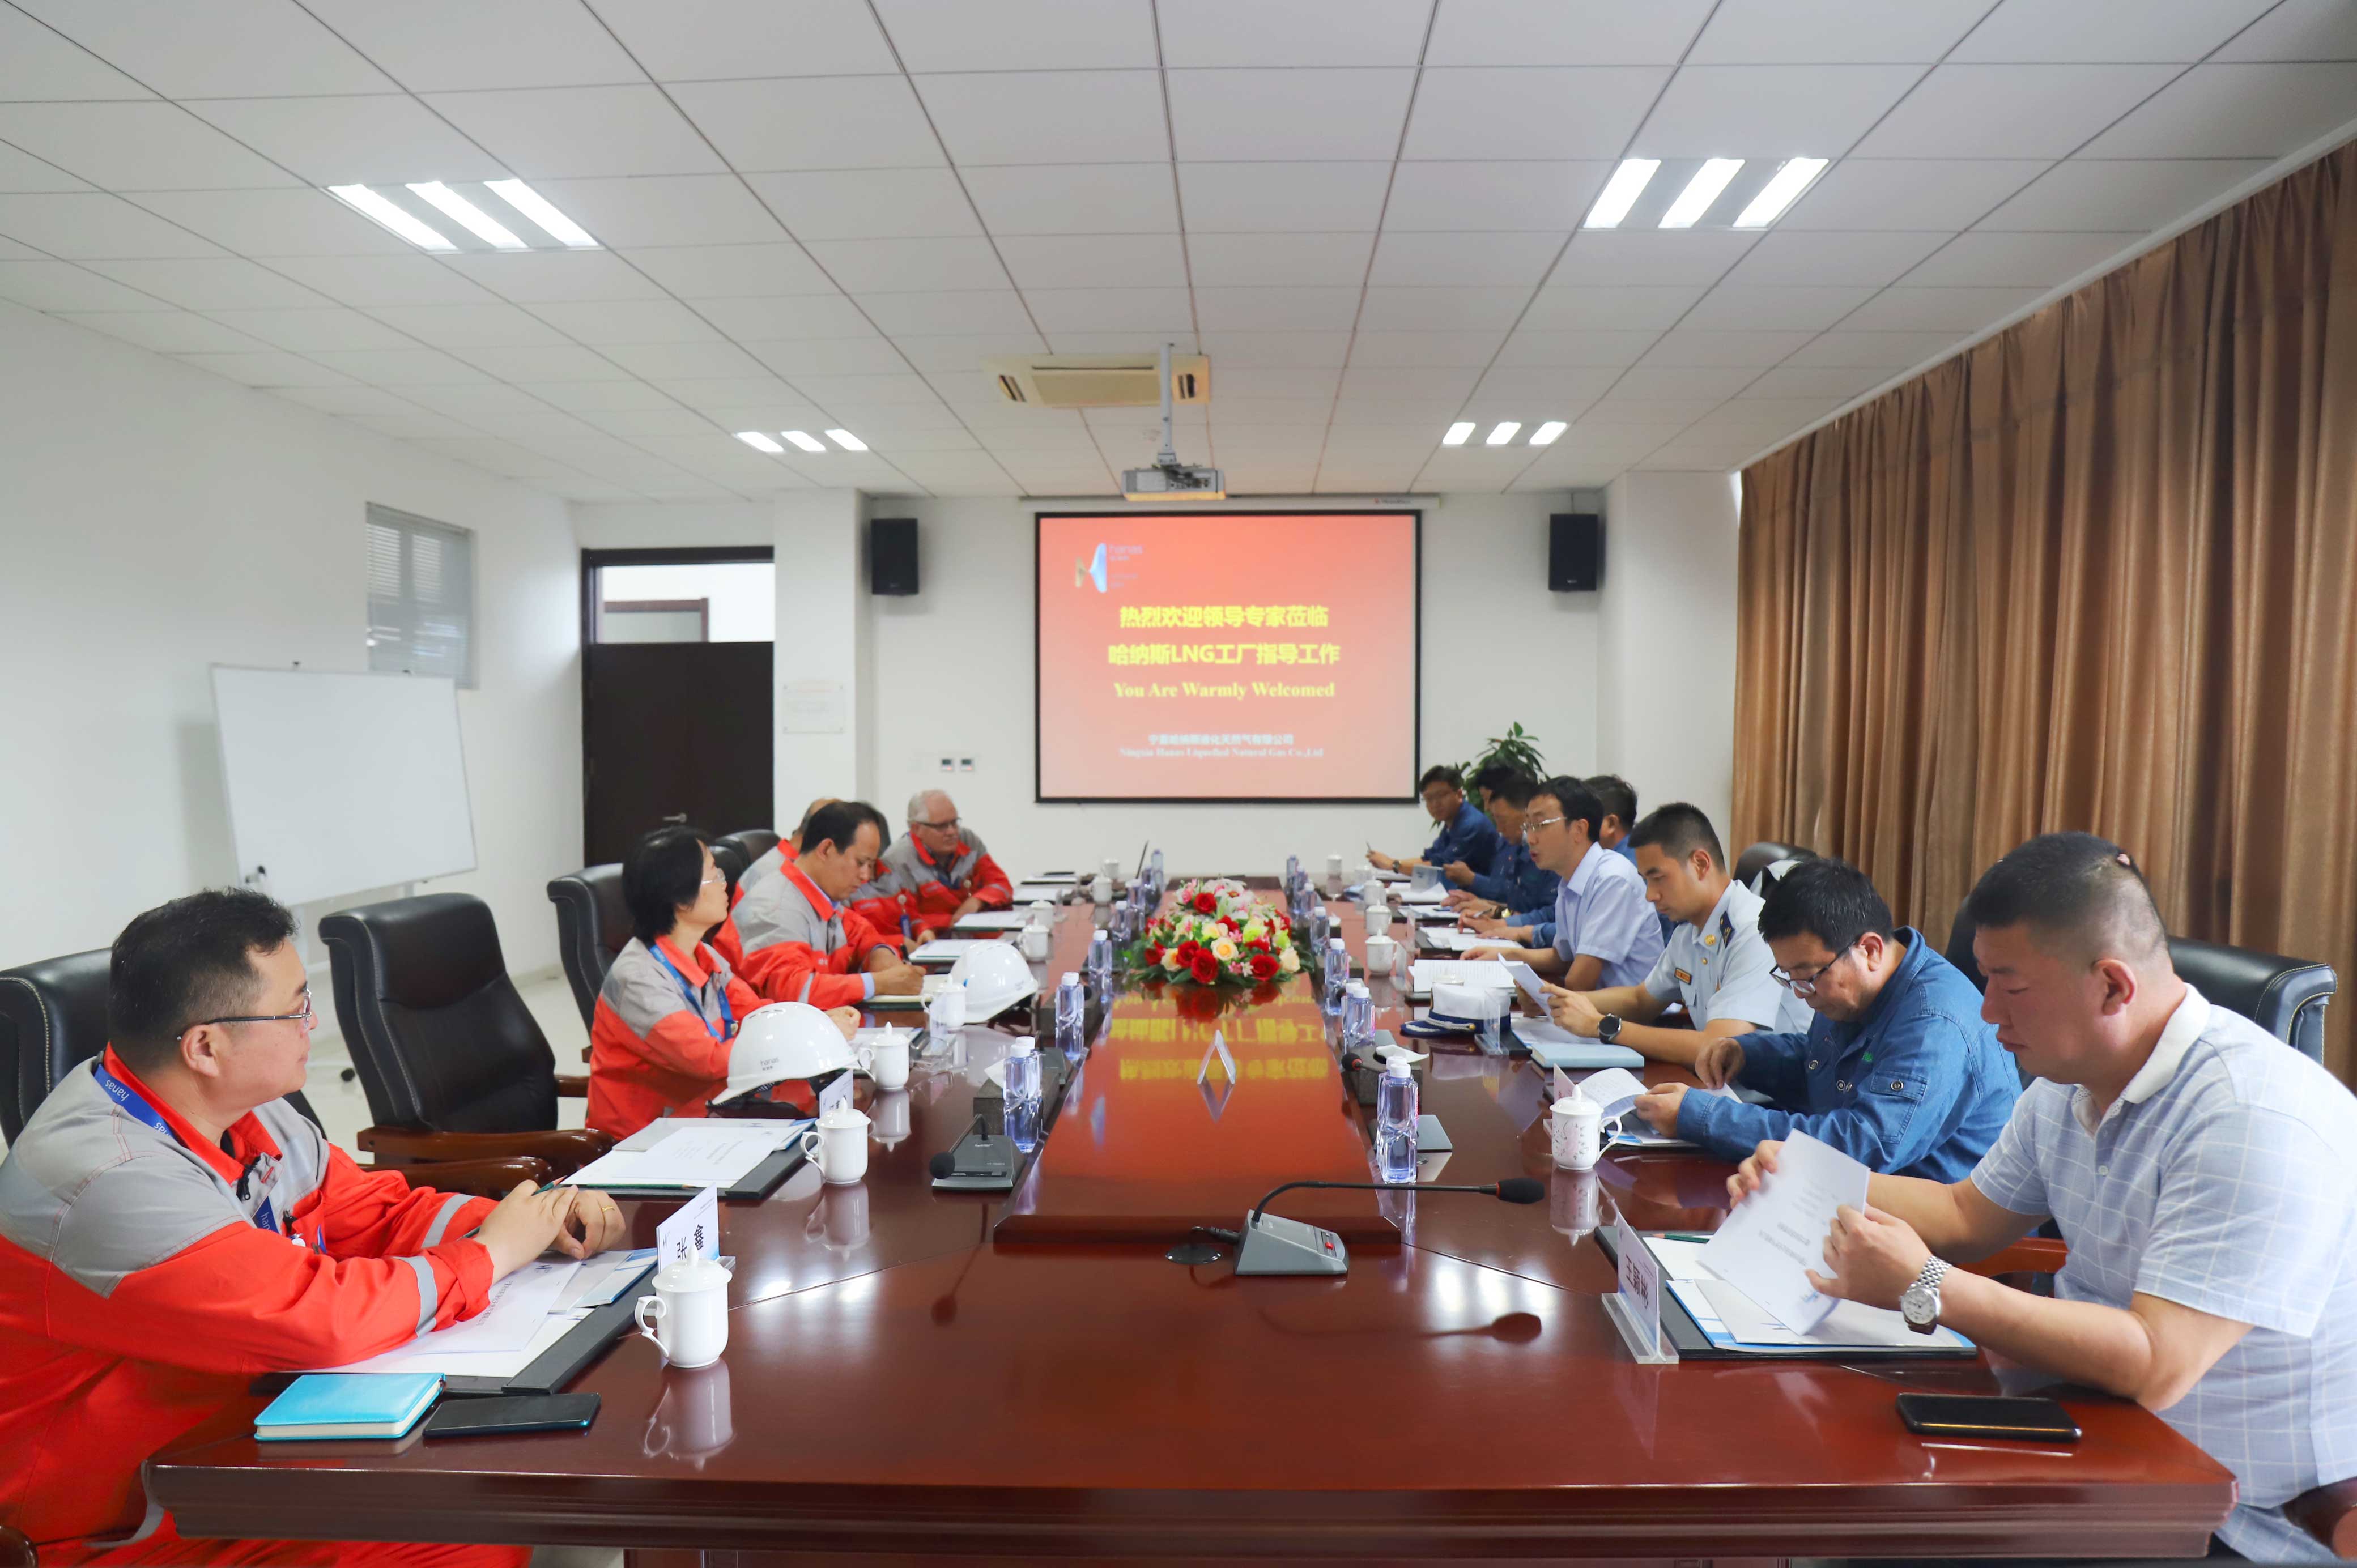 Leaders of Ningdong Emergency Management Bureau and fire rescue brigade visited Hanas LNG  to inspect and guide safety work